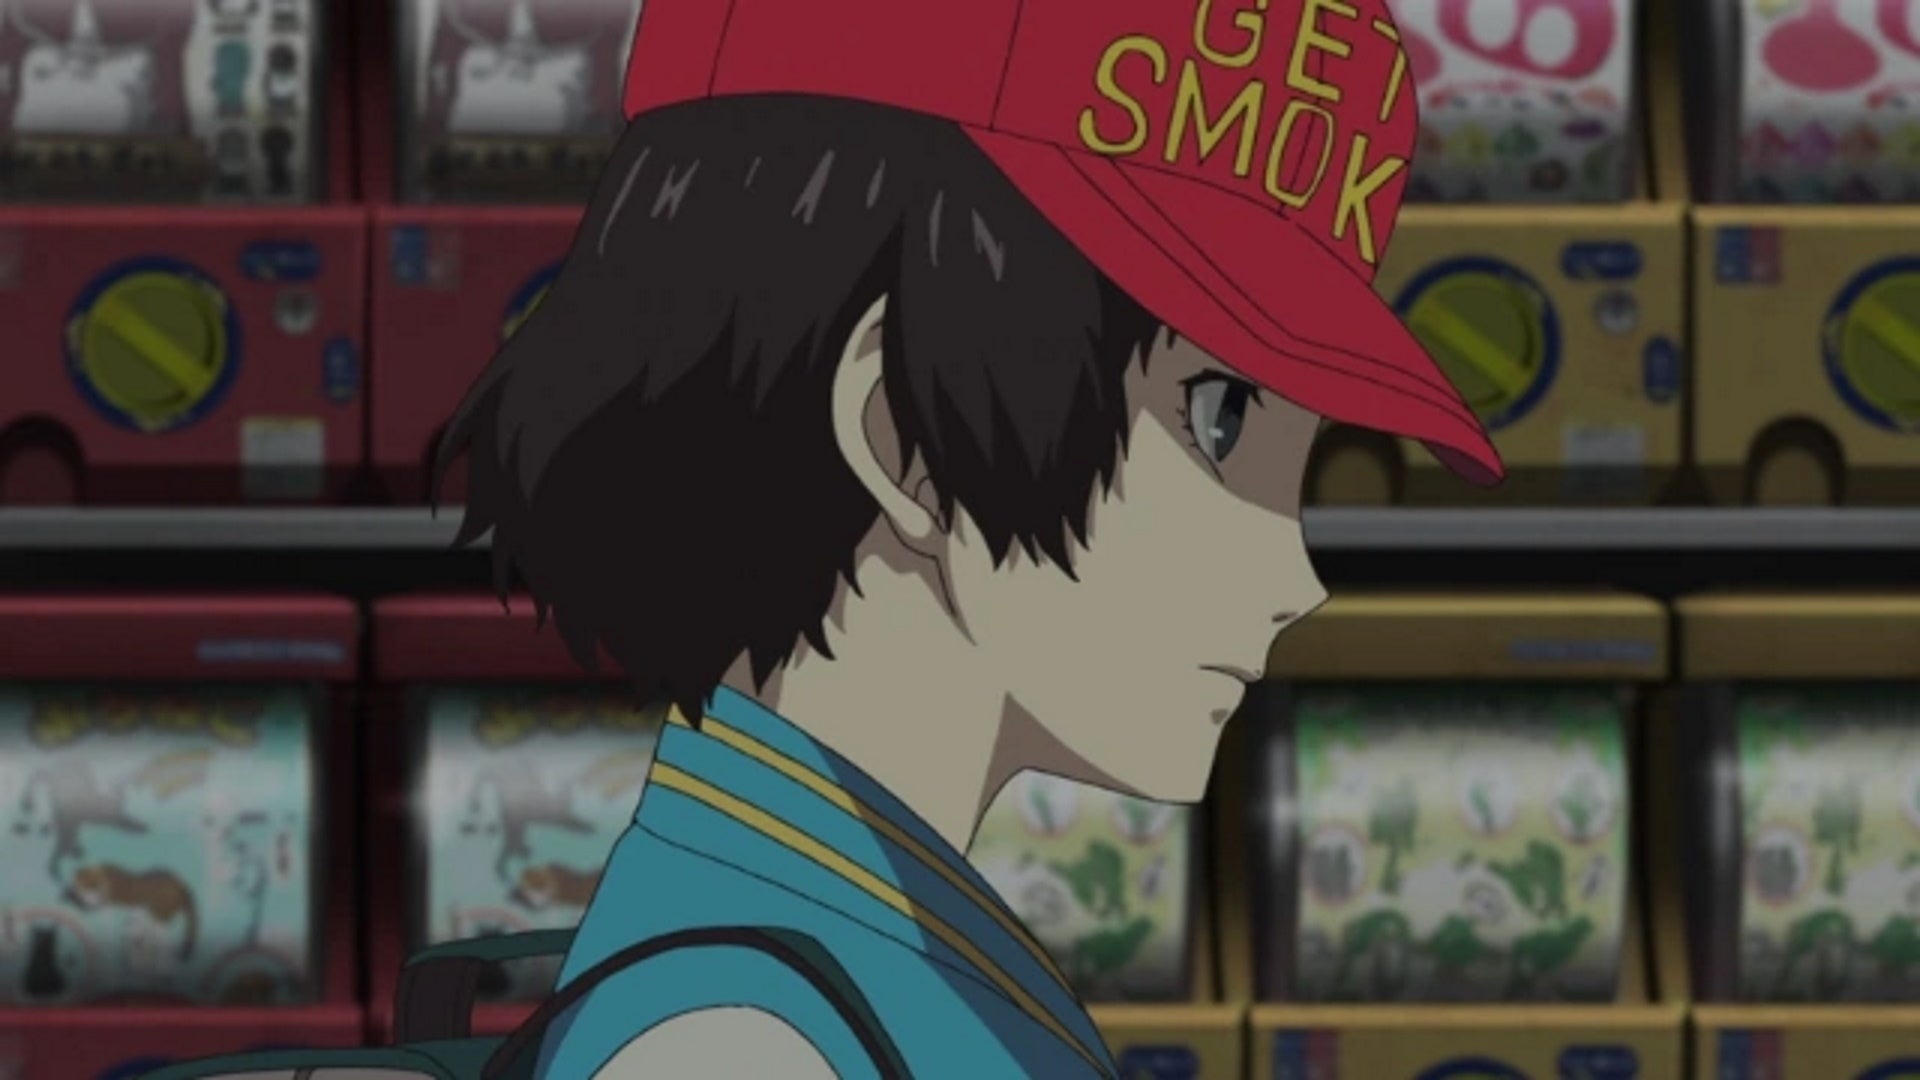 Persona 5 Royal Shinya Confidant: An anime boy in a red cap and blue jacket is walking through a crowded shopping district